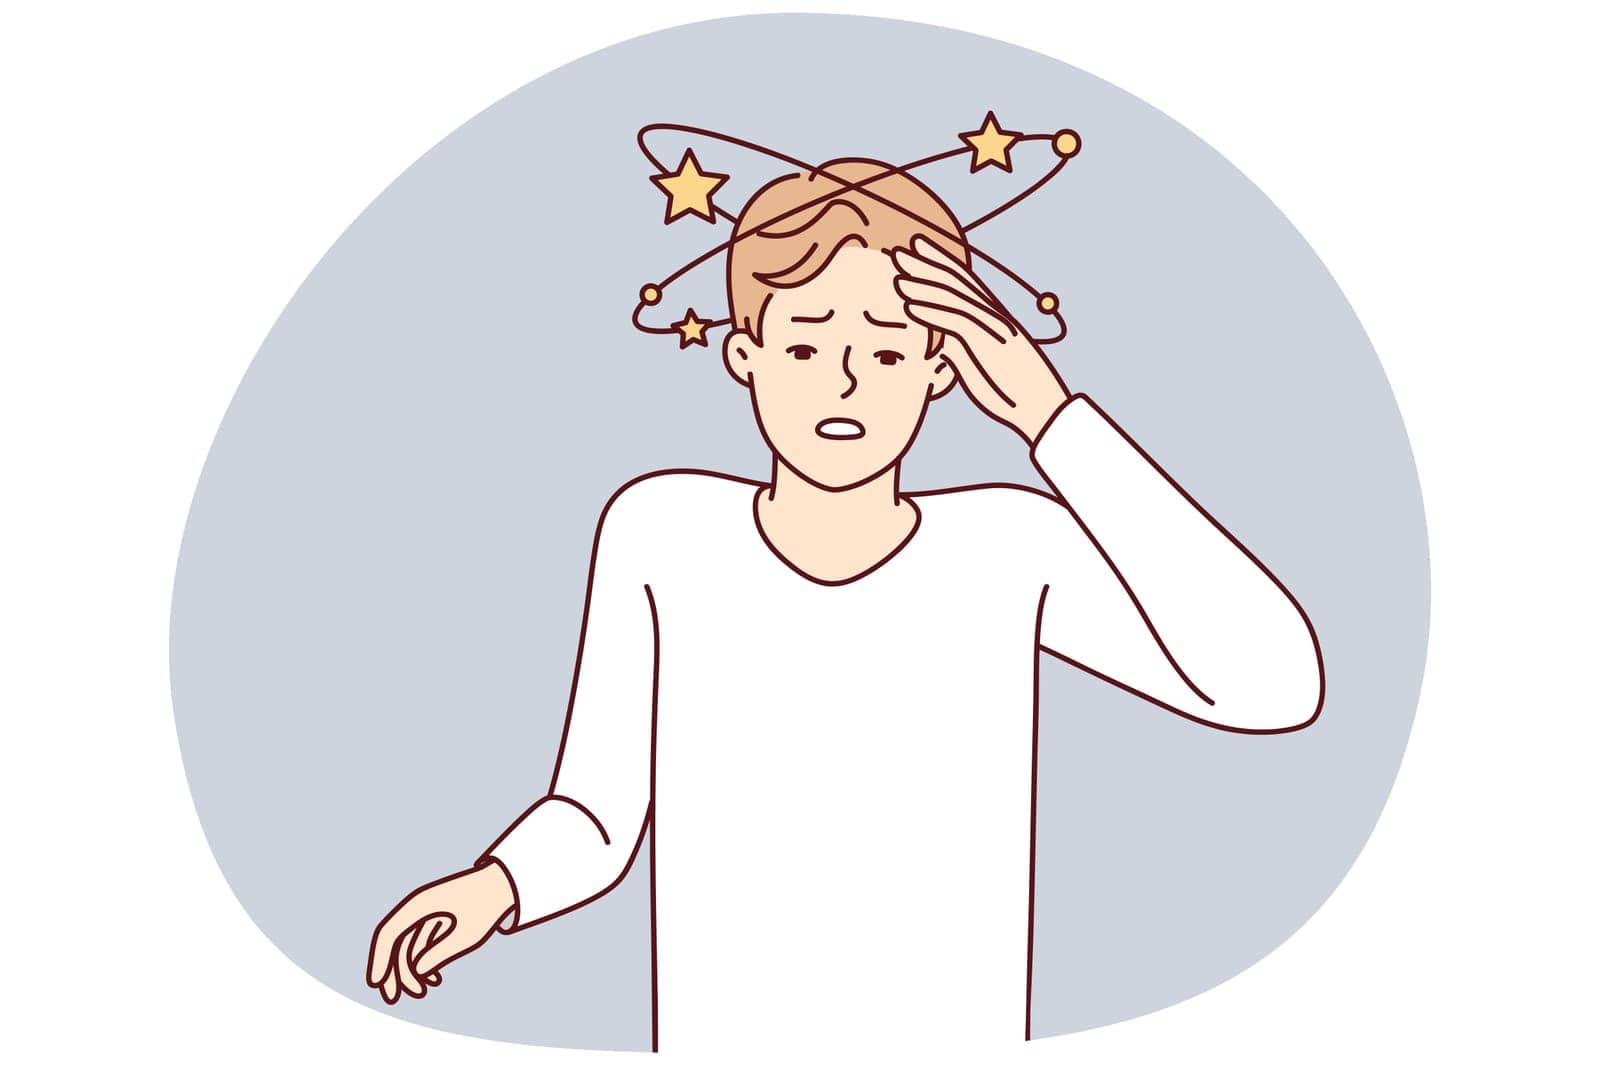 Suffering man experiencing pain in head after severe injury puts hand on forehead. Guy suffers from dizziness or needs to take drugs against intracranial pressure. Flat vector illustration